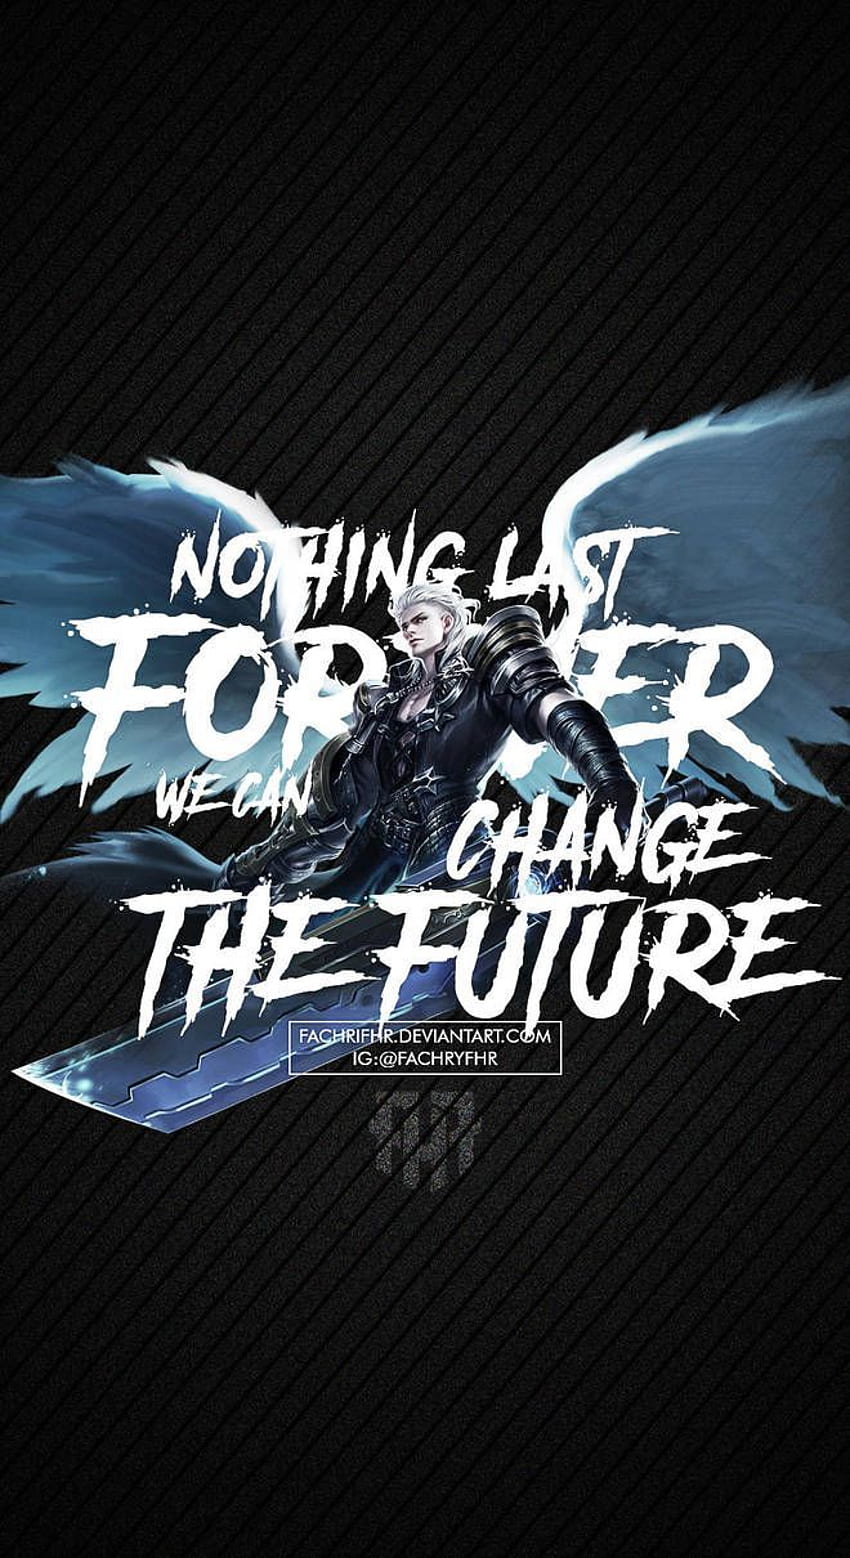 Phone Alucard Quote by FachriFHR. Mobile legend , Alucard mobile legends, Mobile legends, Quotes HD phone wallpaper